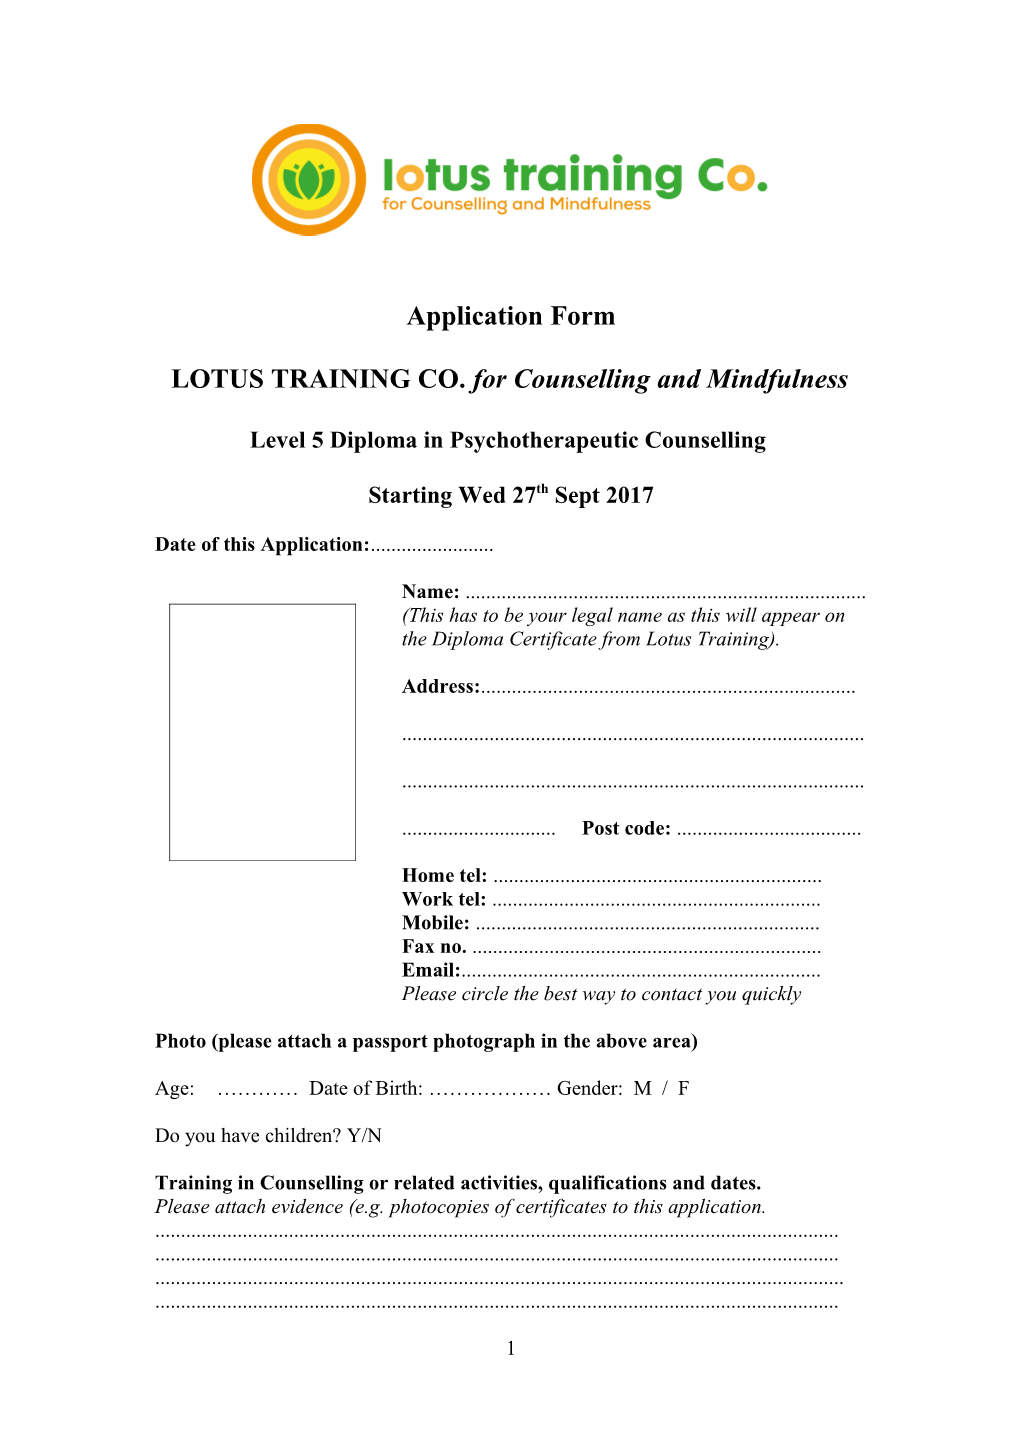 LOTUS TRAINING CO. for Counselling and Mindfulness